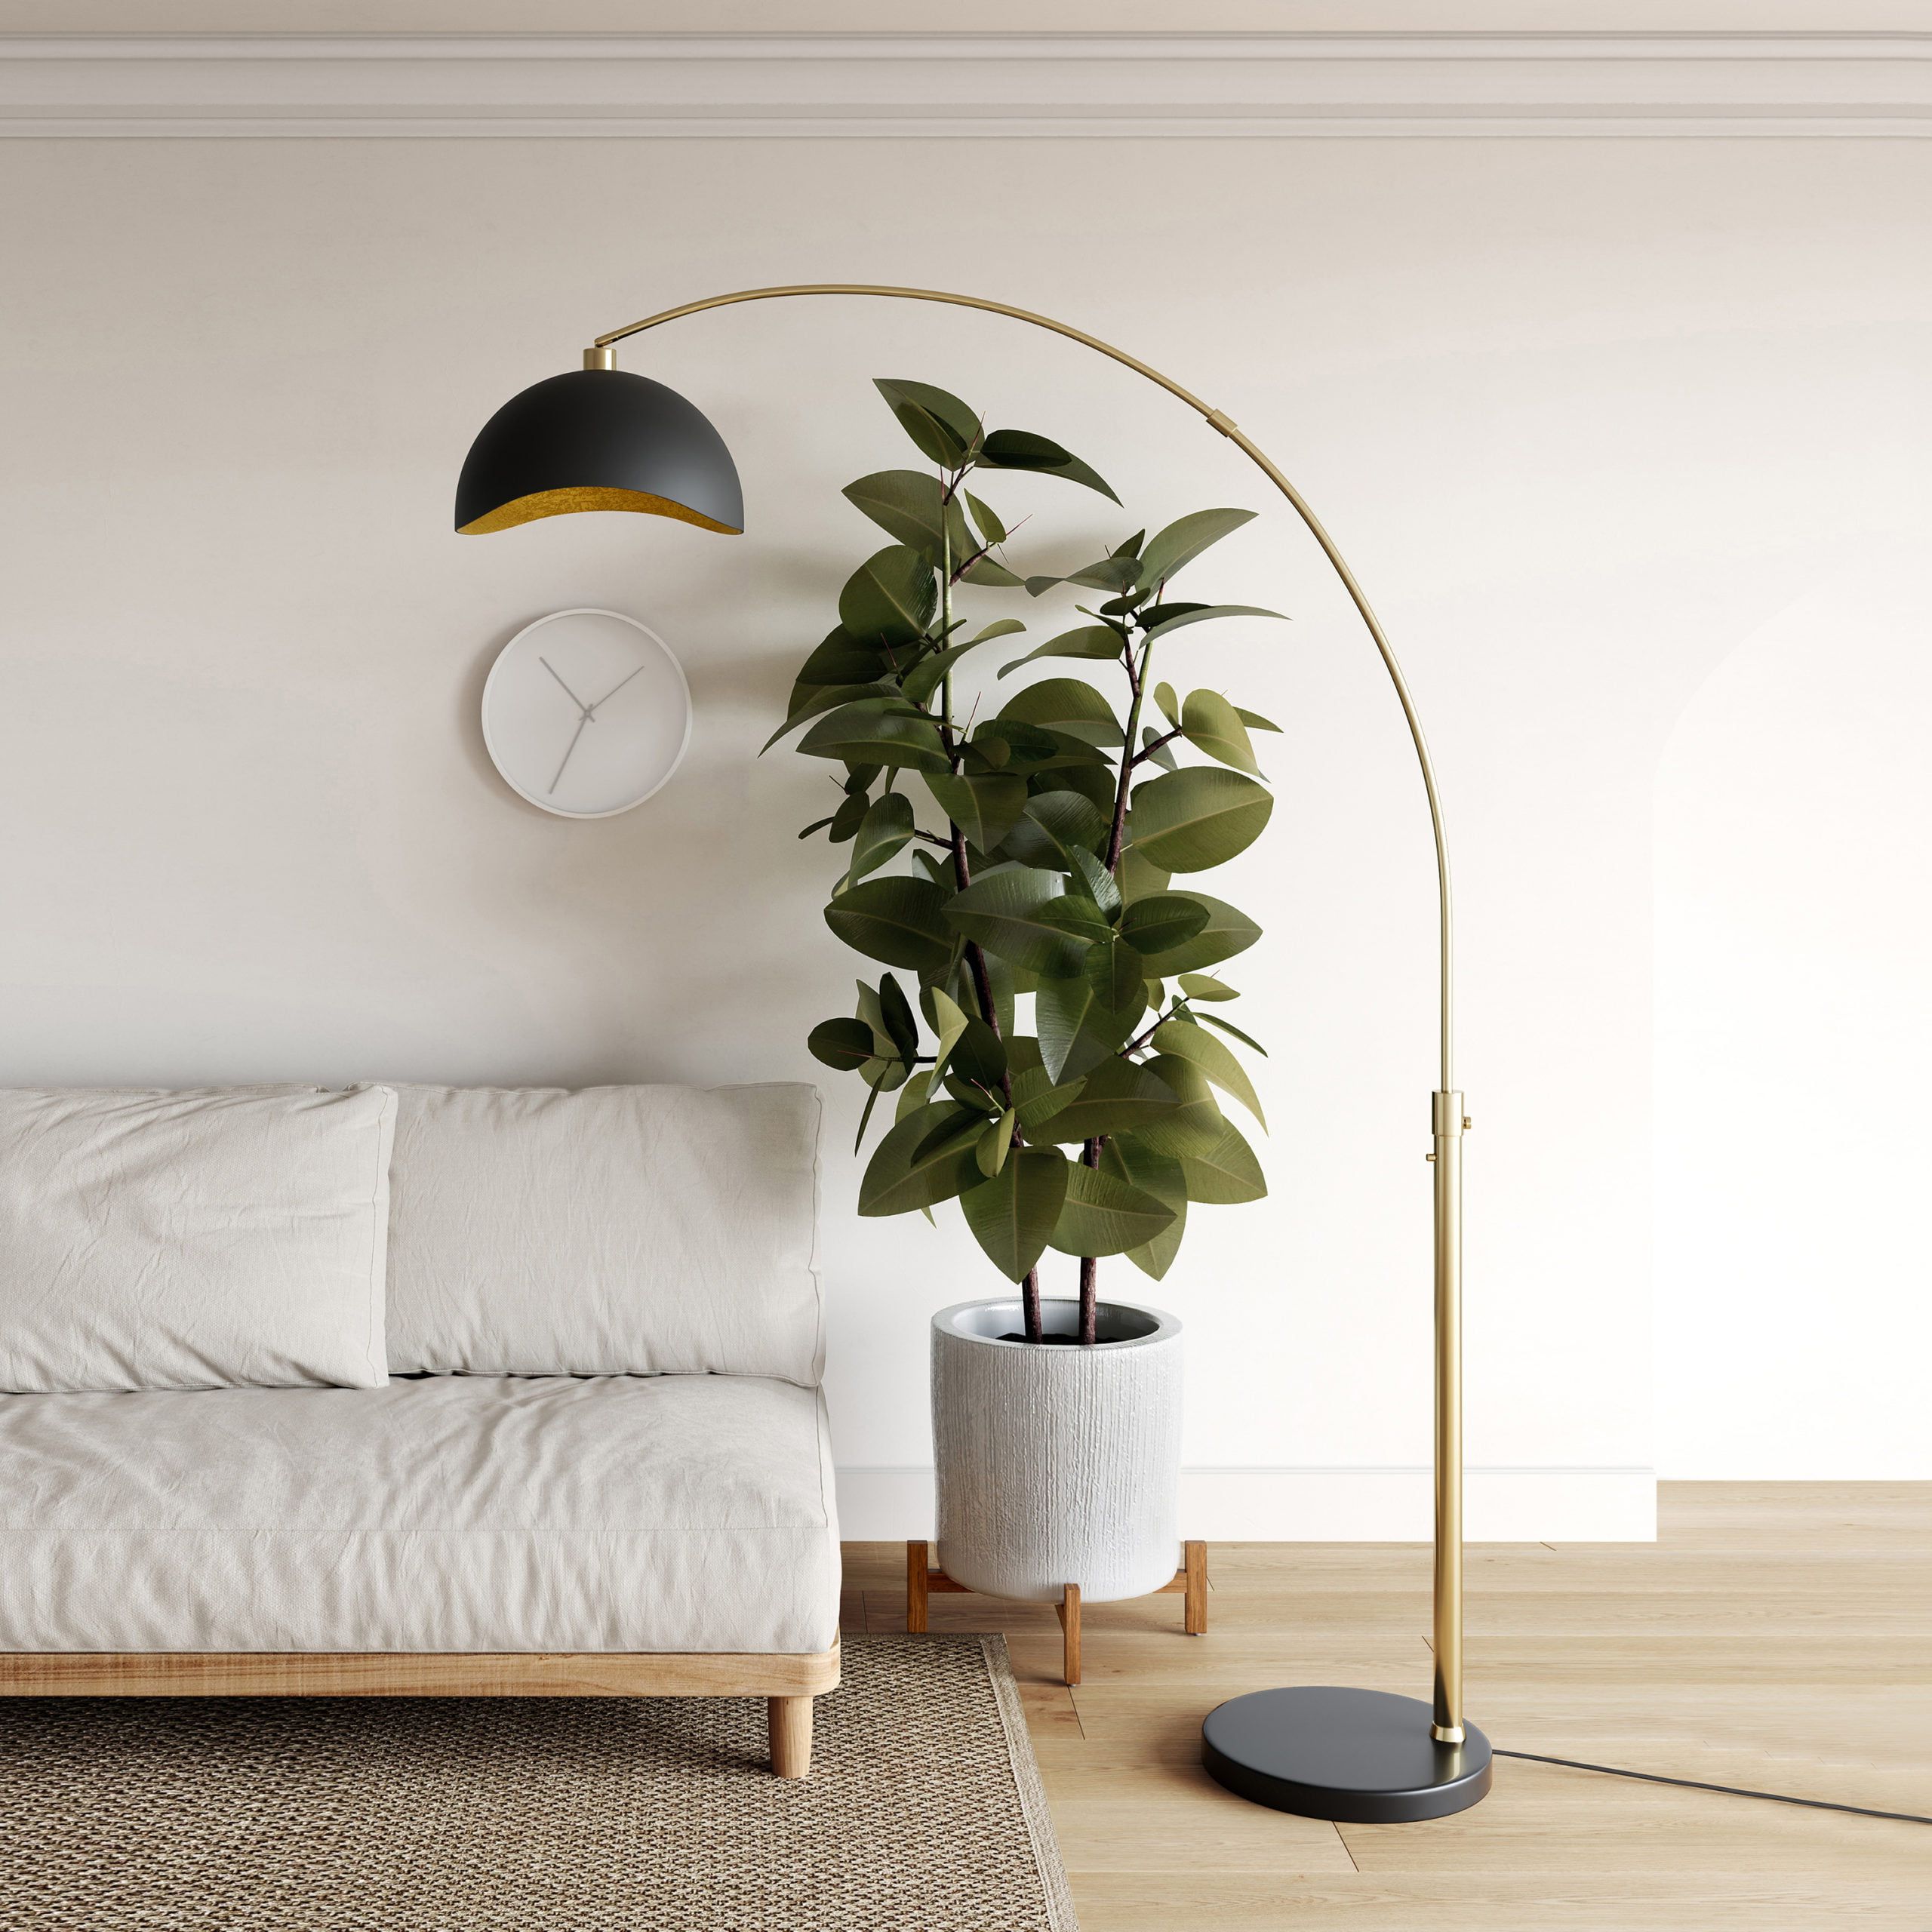 The Art Of The Arc Floor Lamp – Nova Of California With 2019 Arc Floor Lamps (View 1 of 15)